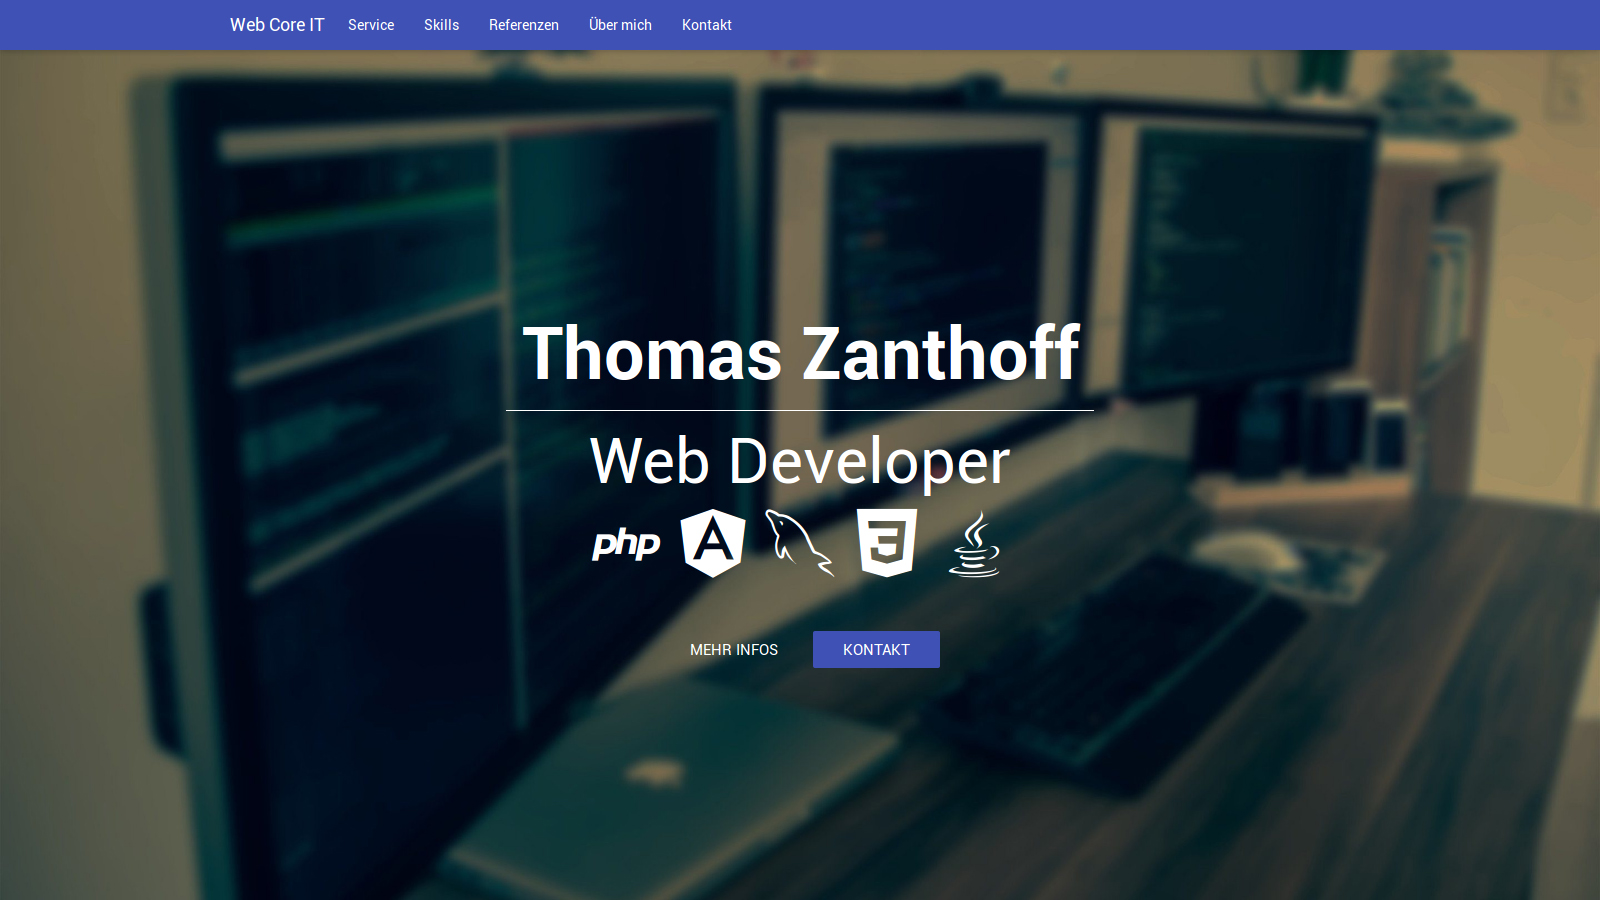 New revision of my Web Core IT Homepage